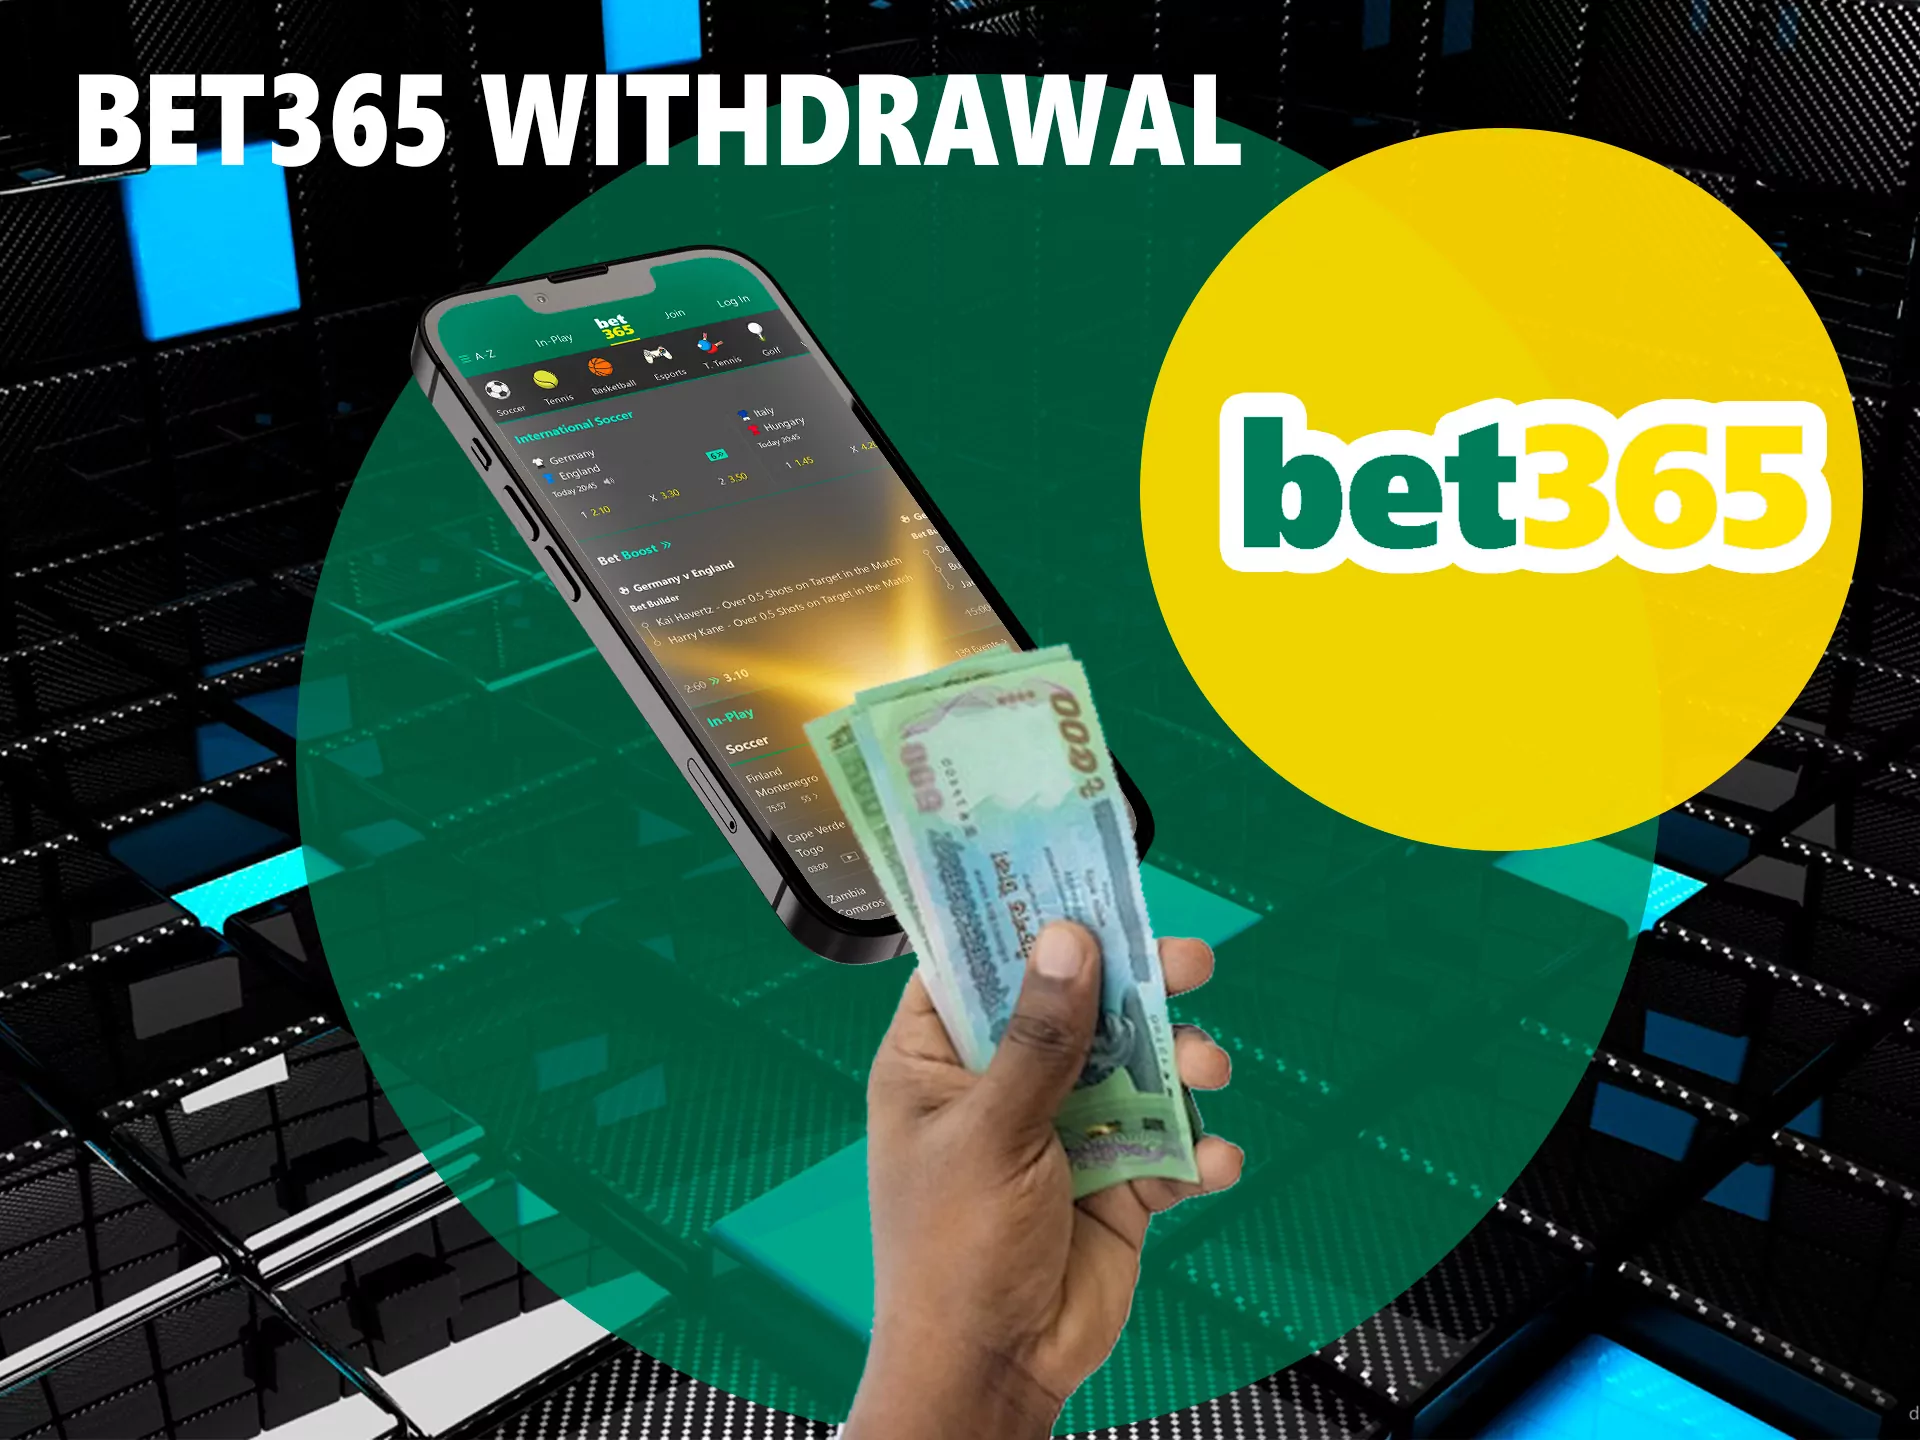 This process is much easier than depositing Bet365 BD, just follow the instructions.